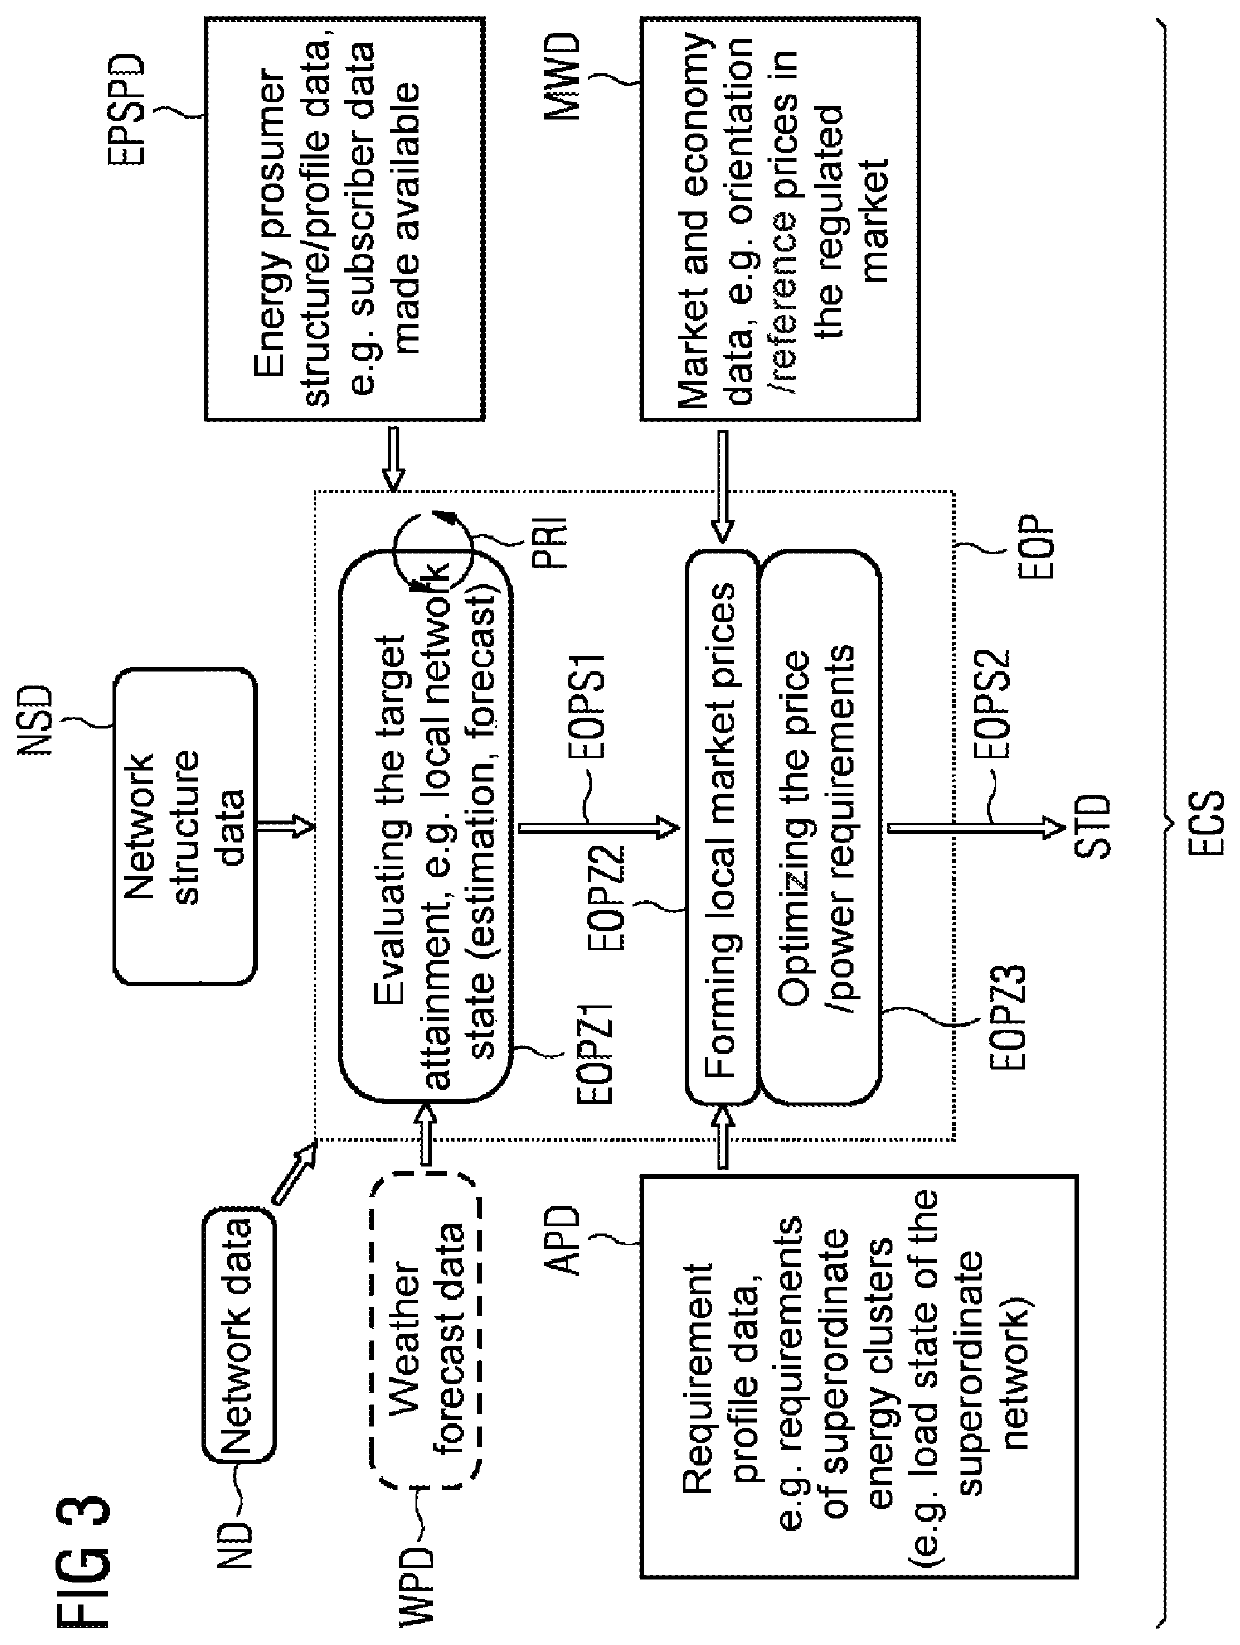 Method, computer program product, device, and energy cluster service system for managing control targets, in particular load balancing processes, when controlling the supply, conversion, storage, infeed, distribution, and/or use of energy in an energy network